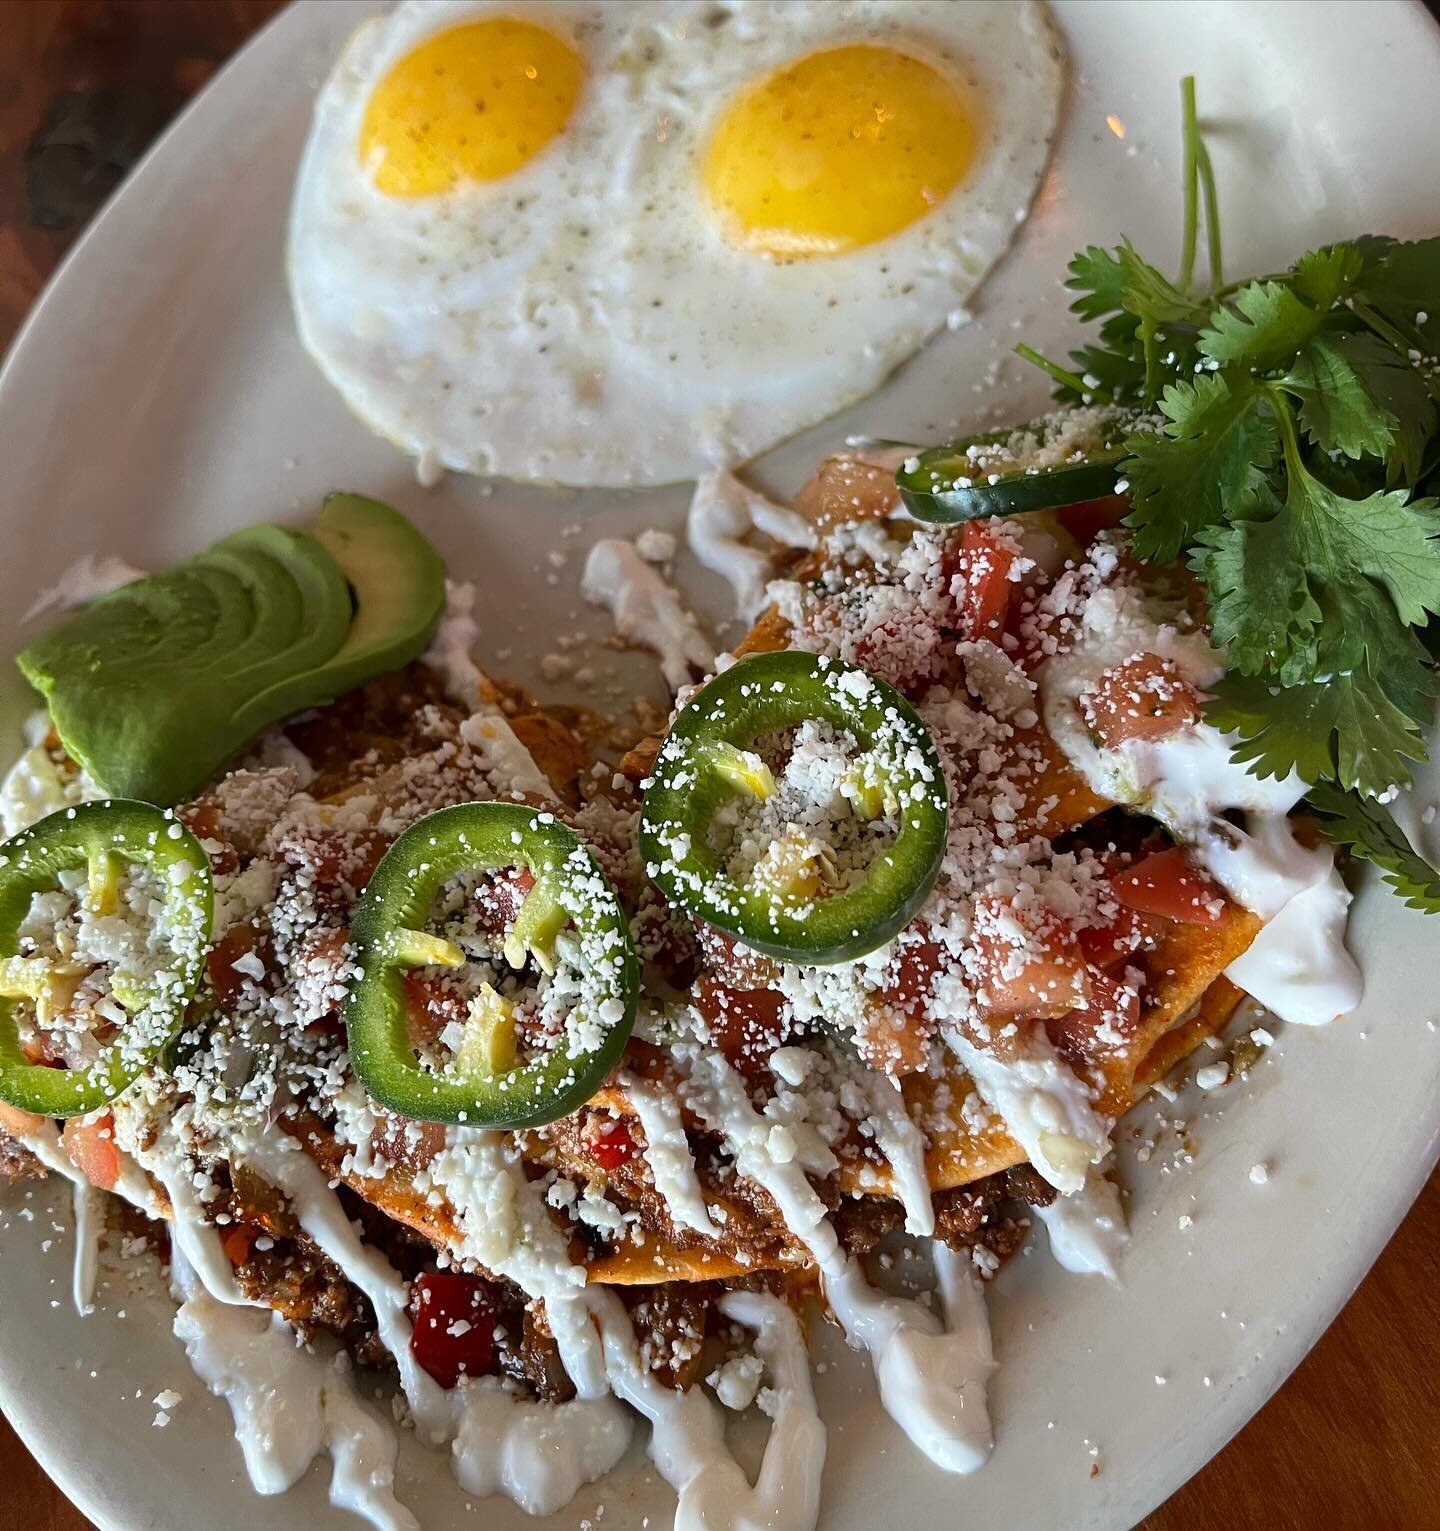 Come on in for the Breefadilla breakfast special! Flour tortillas filled with Jack Mountain Meat&rsquo;s ground beef, smoked gouda &amp; jack cheeses, red chili &amp; guajillo sauce, garlic and saut&eacute;ed peppers &amp; onions. Topped with sour cr